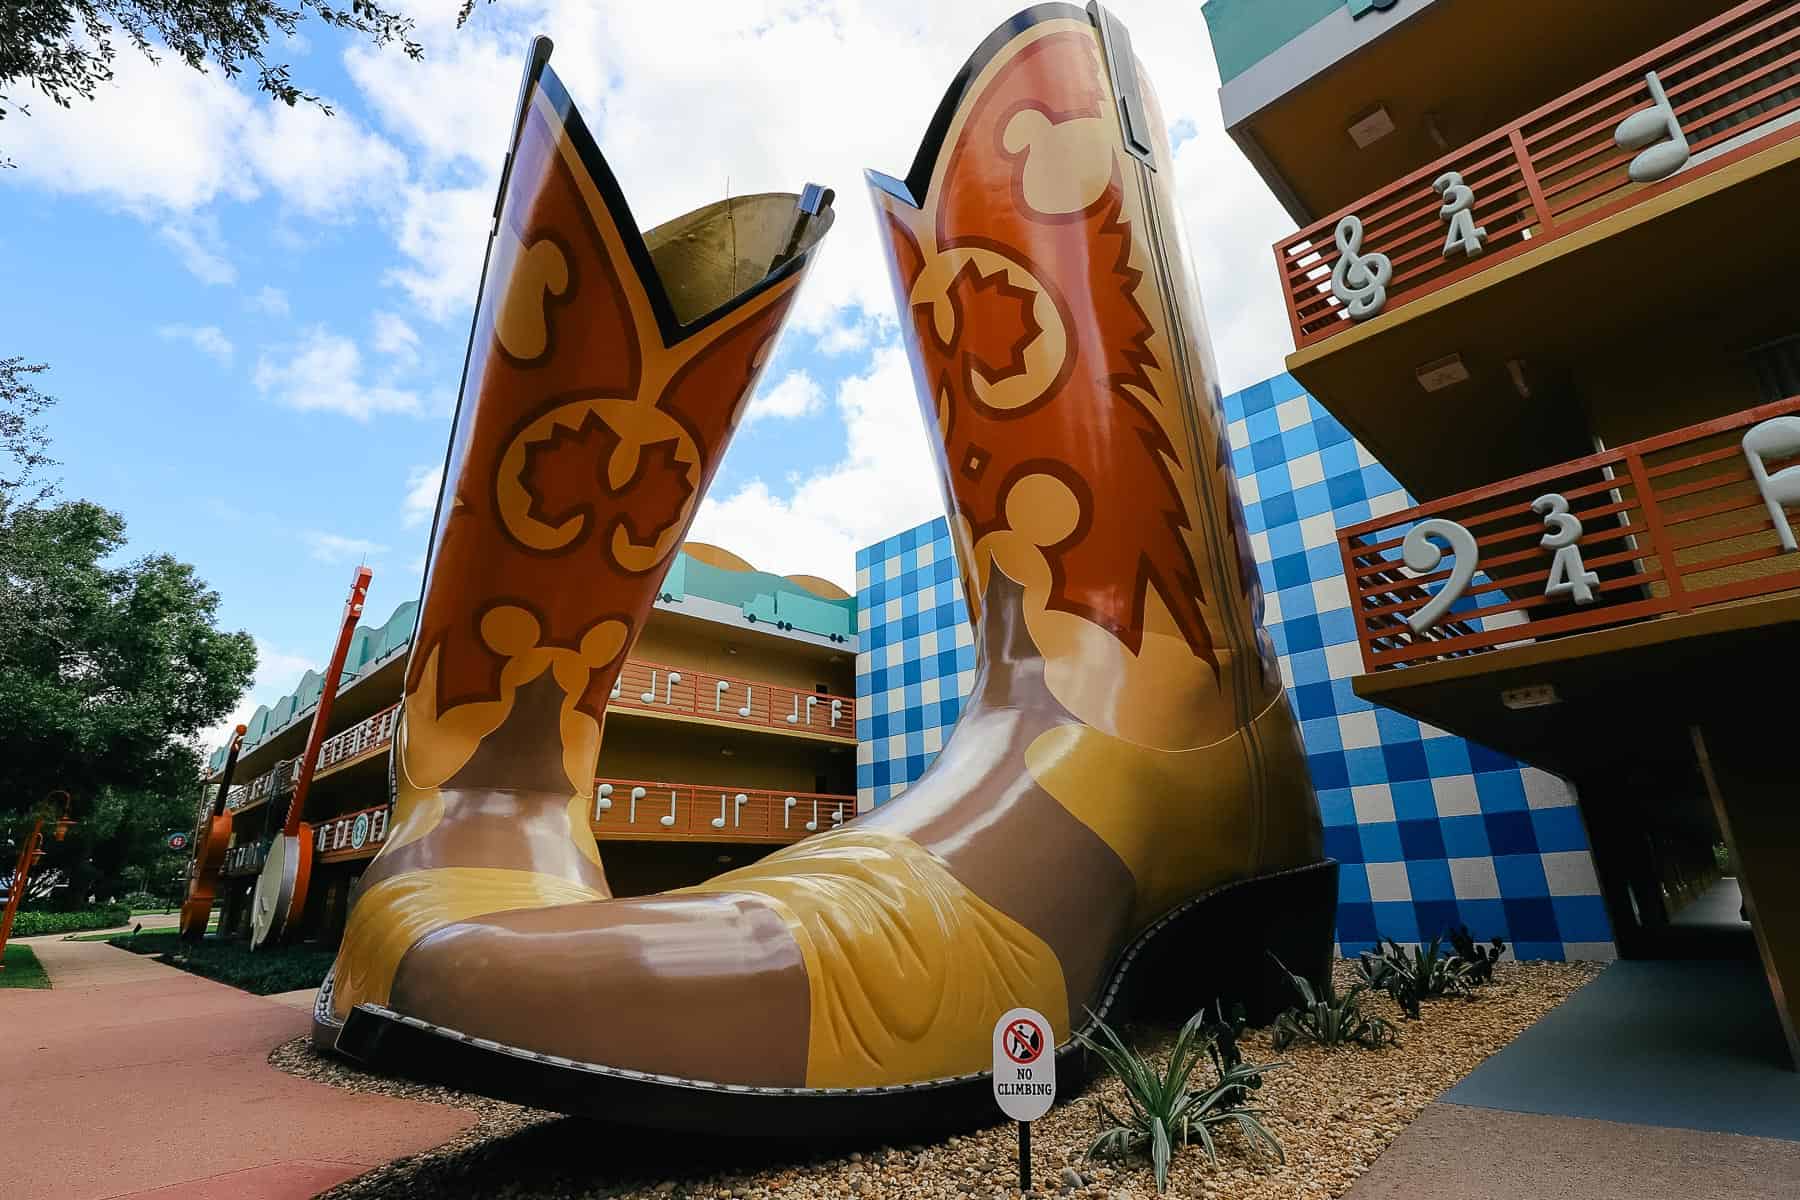 Giant-sized Cowboy Boots in Country Fair at All-Star Music